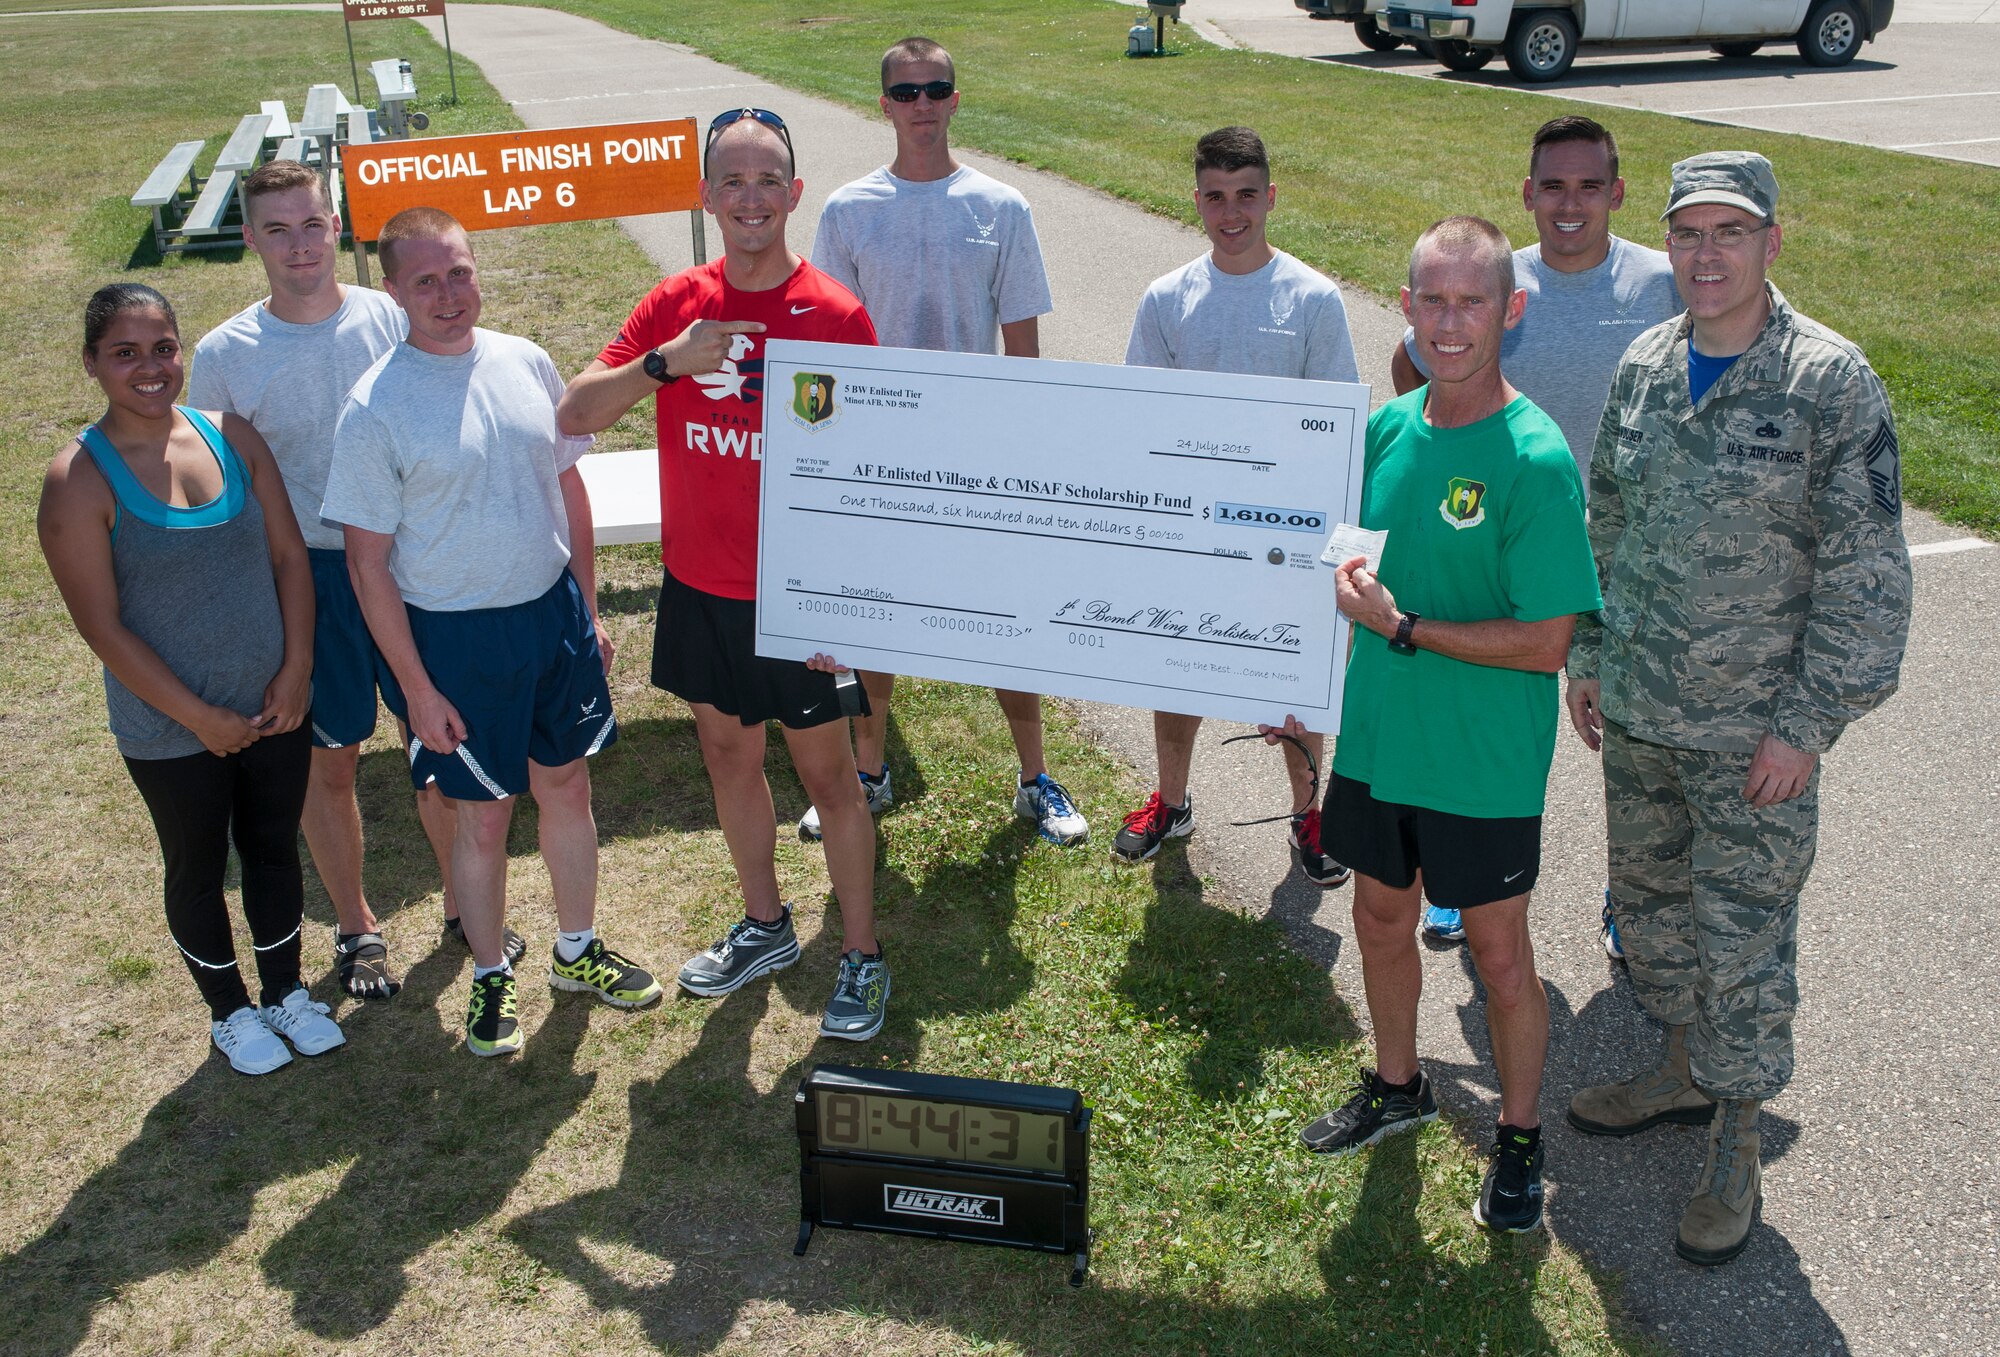 Chief Master Sgt. Geoff Weimer, 5th Bomb Wing command chief, is presented a check at the outdoor track finish line after running 52 miles at Minot Air Force Base, N.D., July 24, 2015. Weimer completed the run to support the Air Force Enlisted Village and Chief Master Sergeant Scholarship Fund and was able to raise $1,733.60. (U.S. Air Force photo/Senior Airman Stephanie Morris)